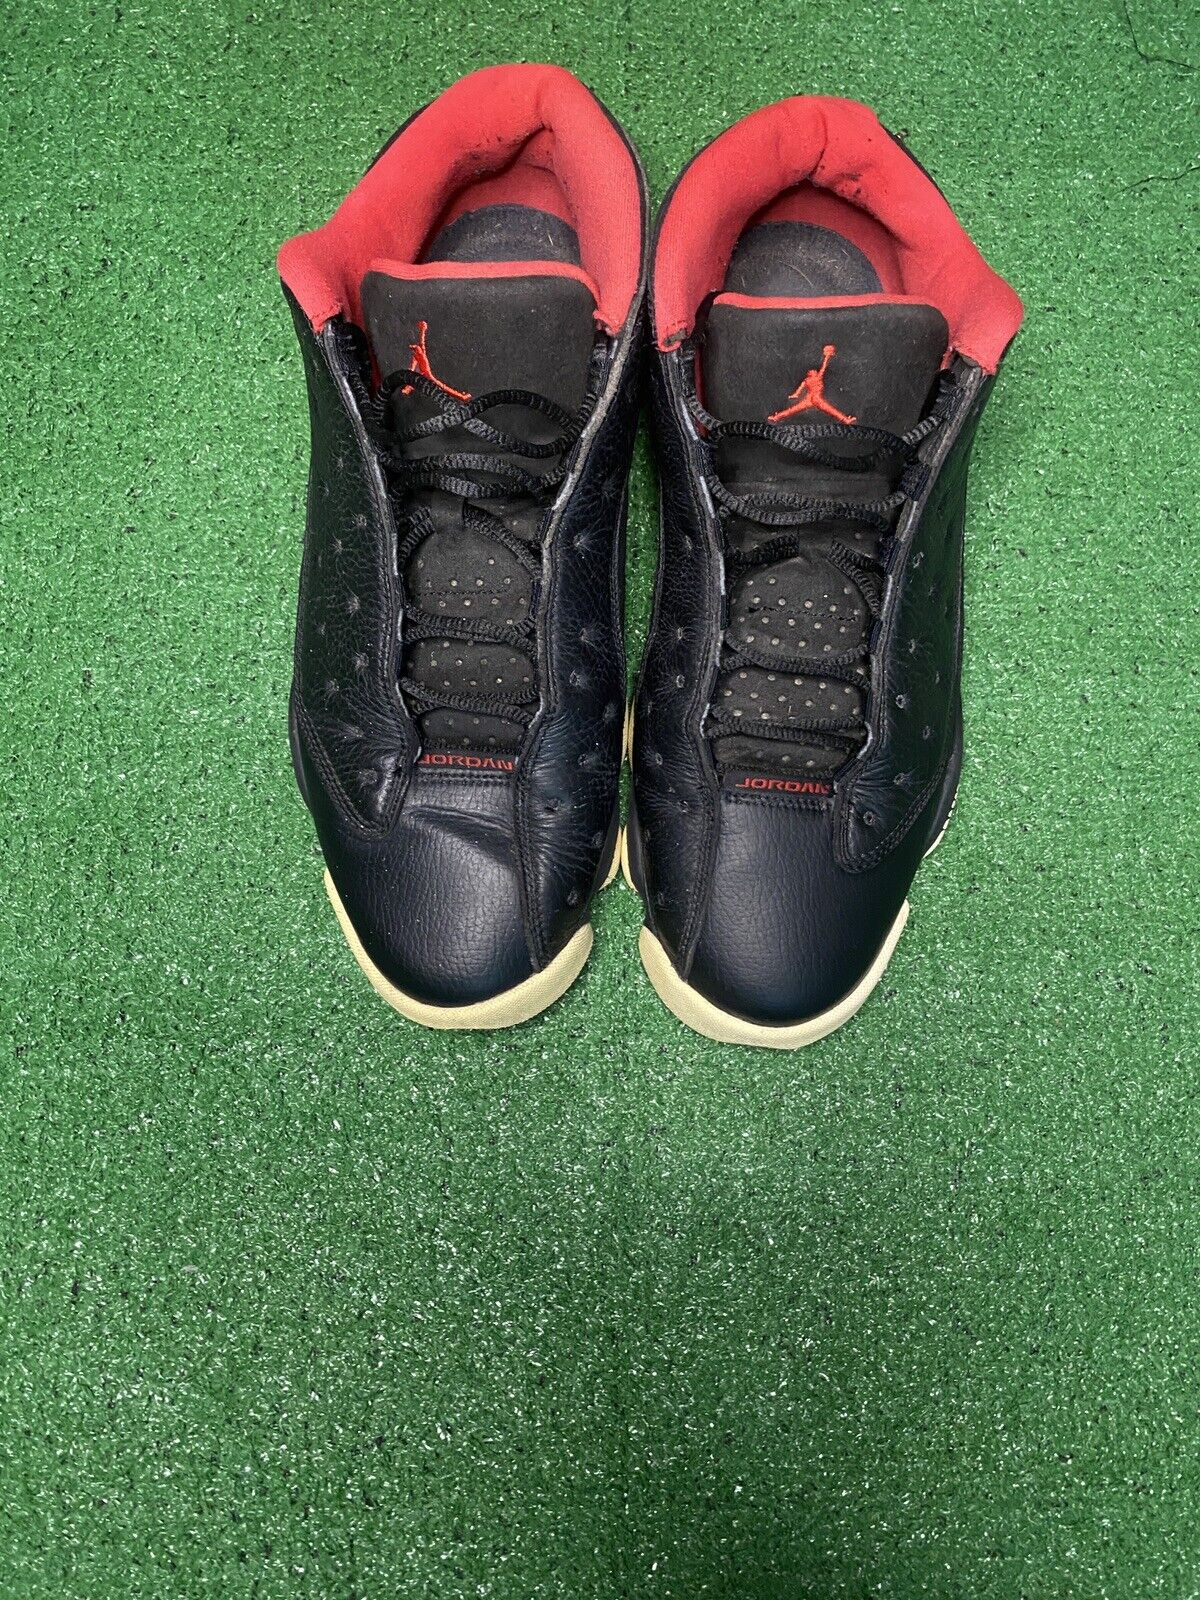 Size 12 - Air Jordan 13 Retro Low Bred Still Wearable And Good Quality No Box.